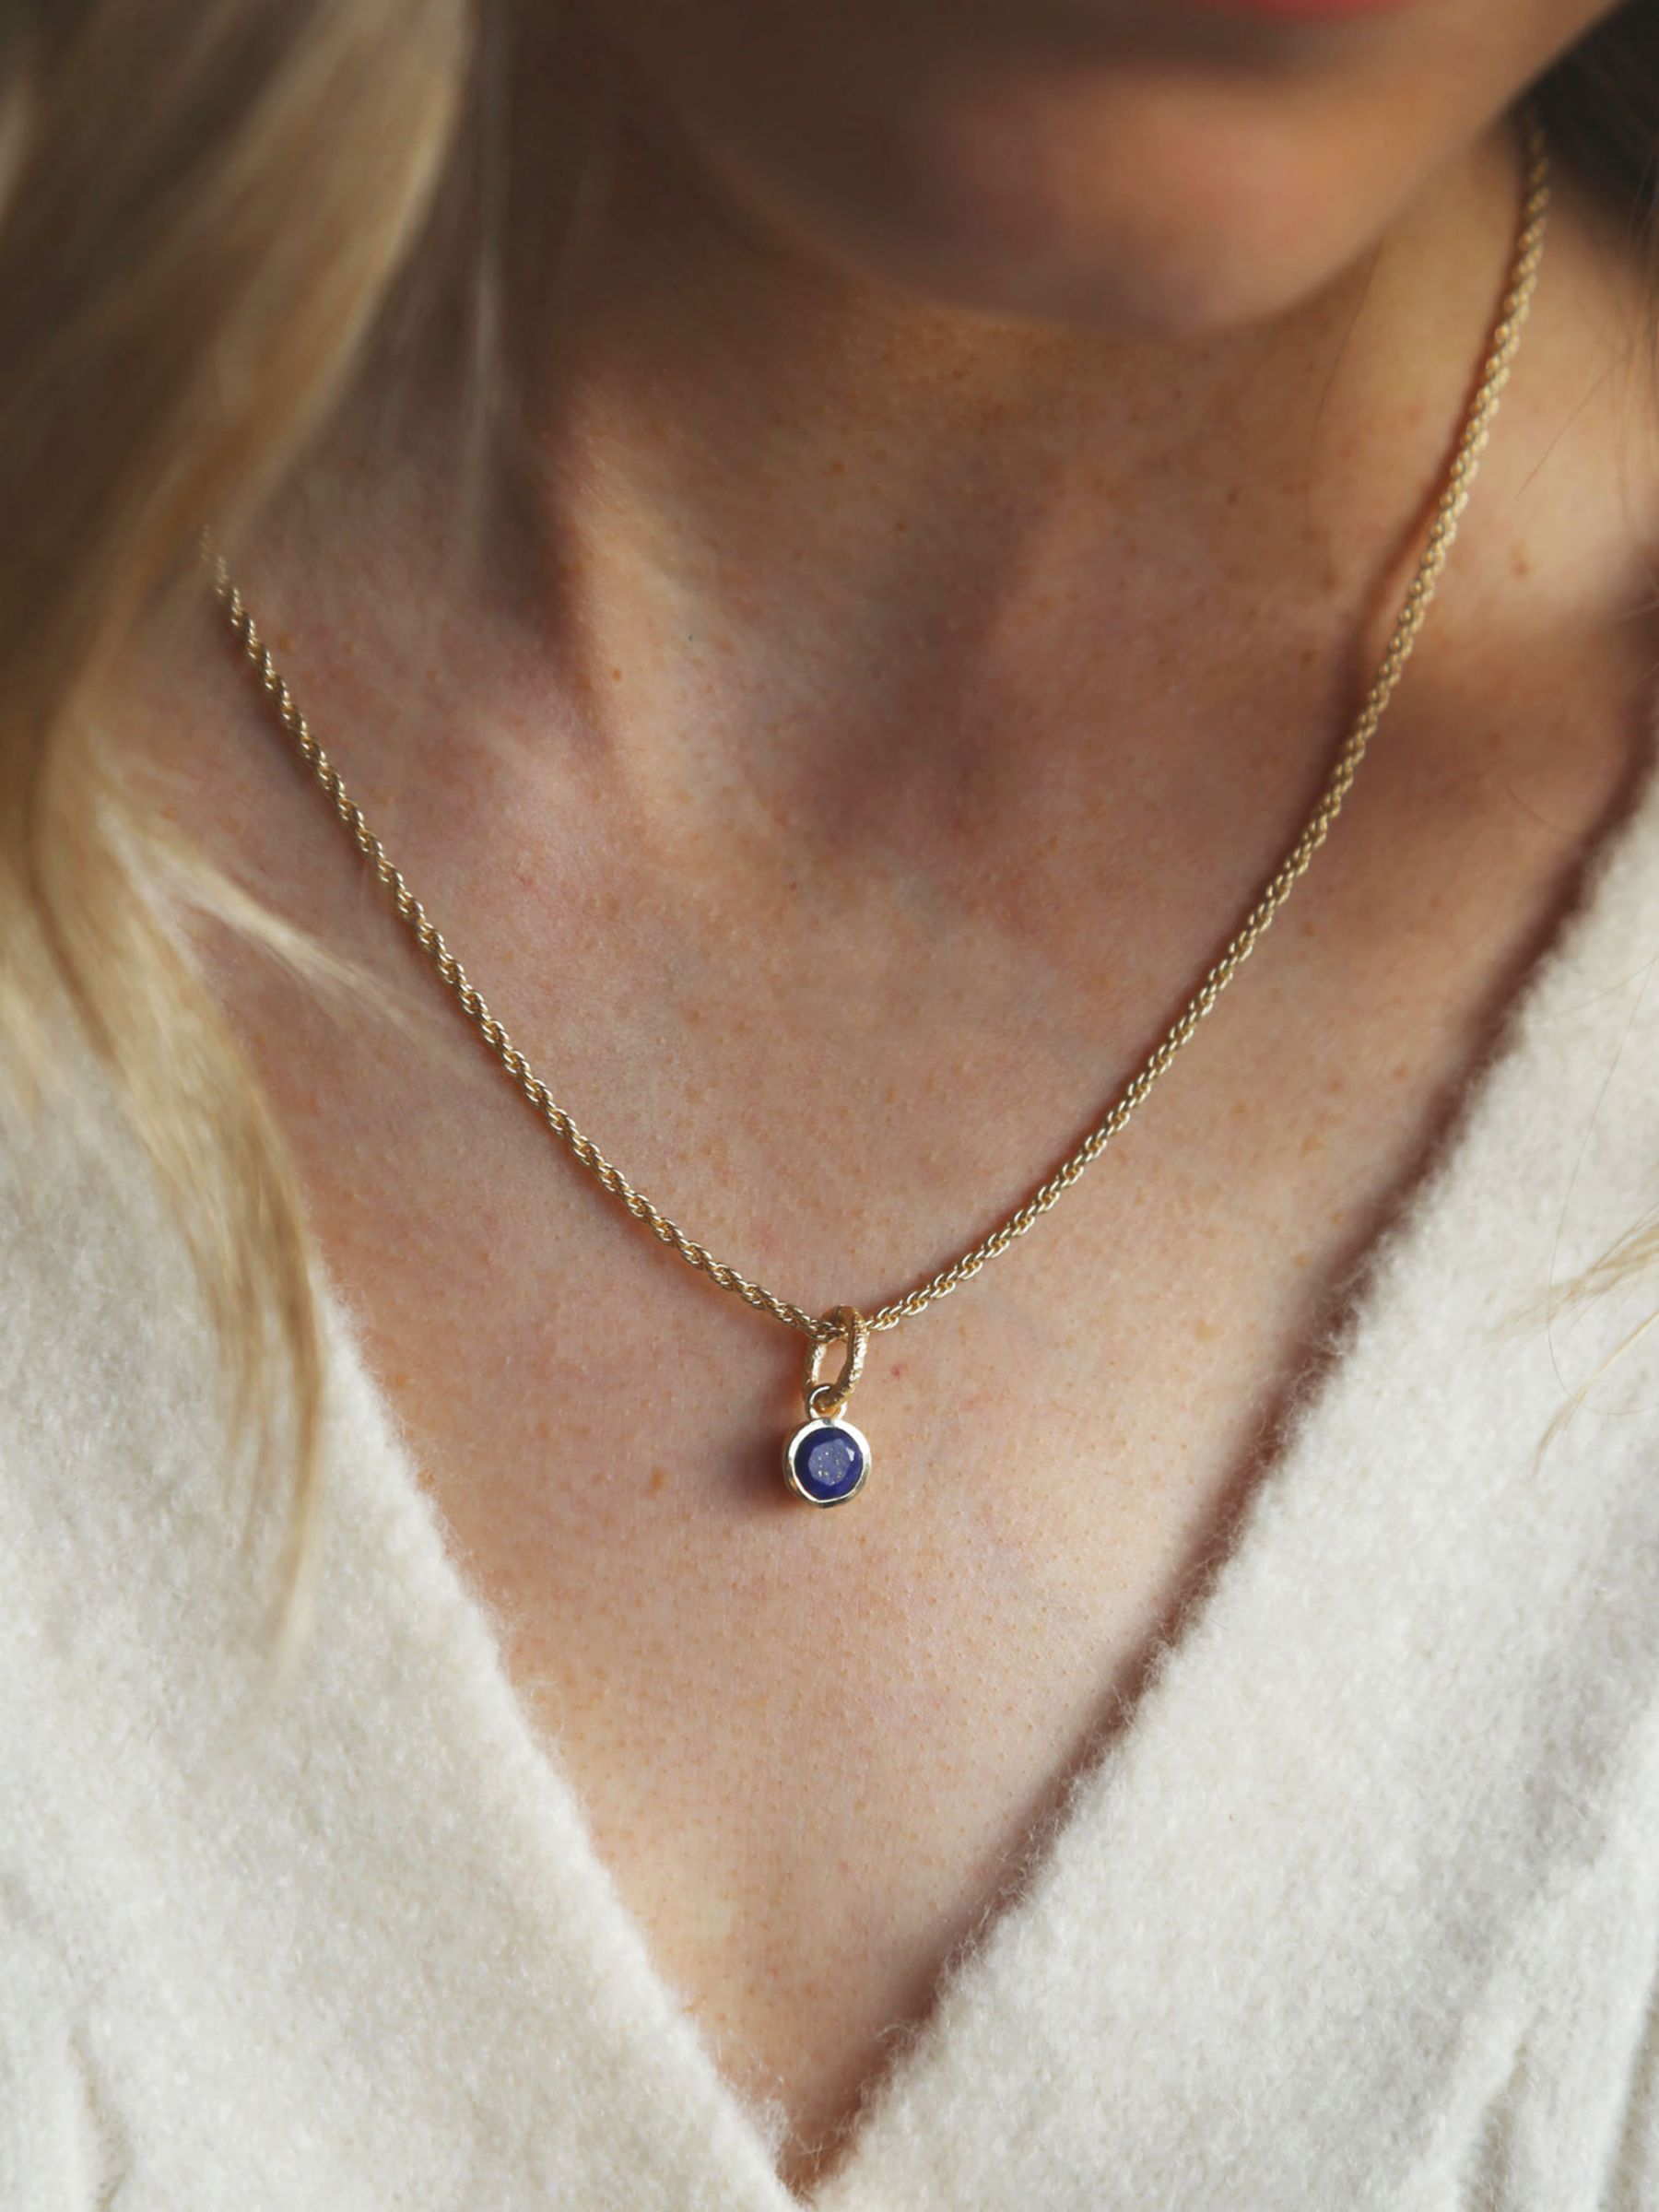 Buy Tutti & Co September Birthstone Necklace, Lapis Online at johnlewis.com